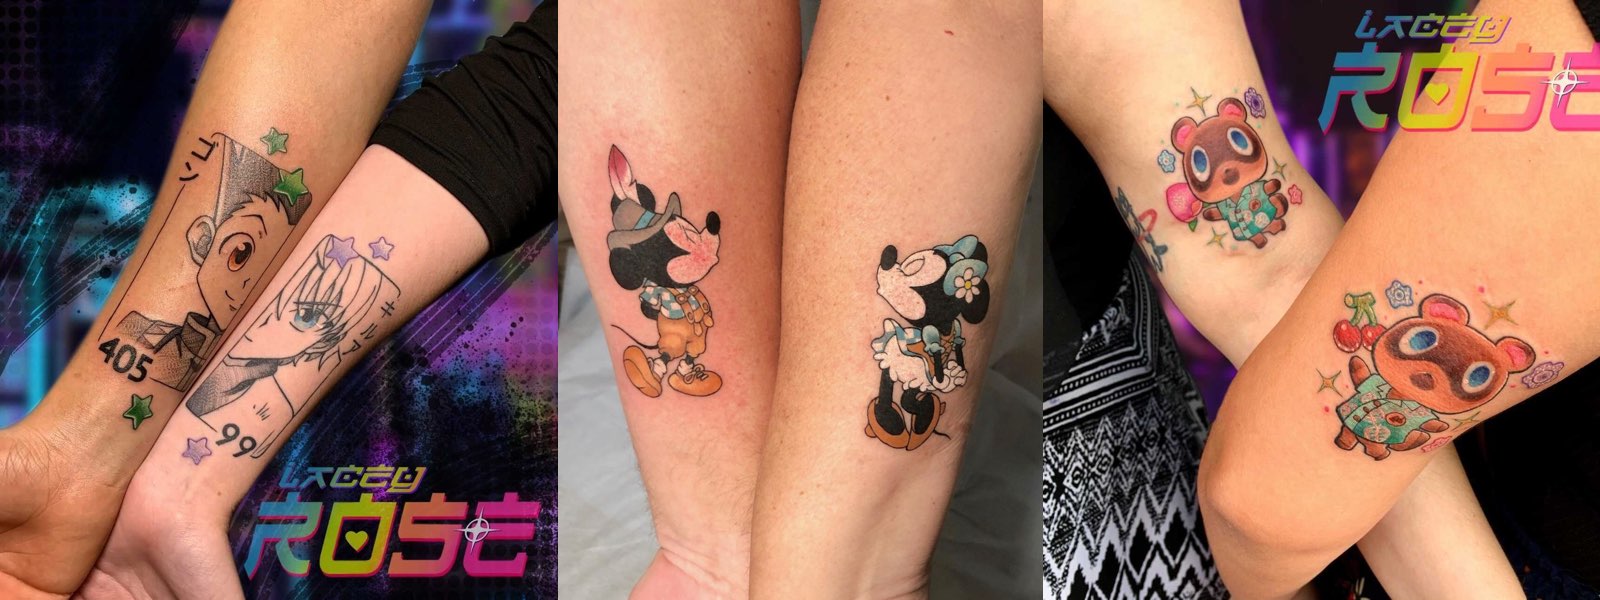 Skull Tattoos on Ankles for Couples - Best Tattoo Ideas Gallery